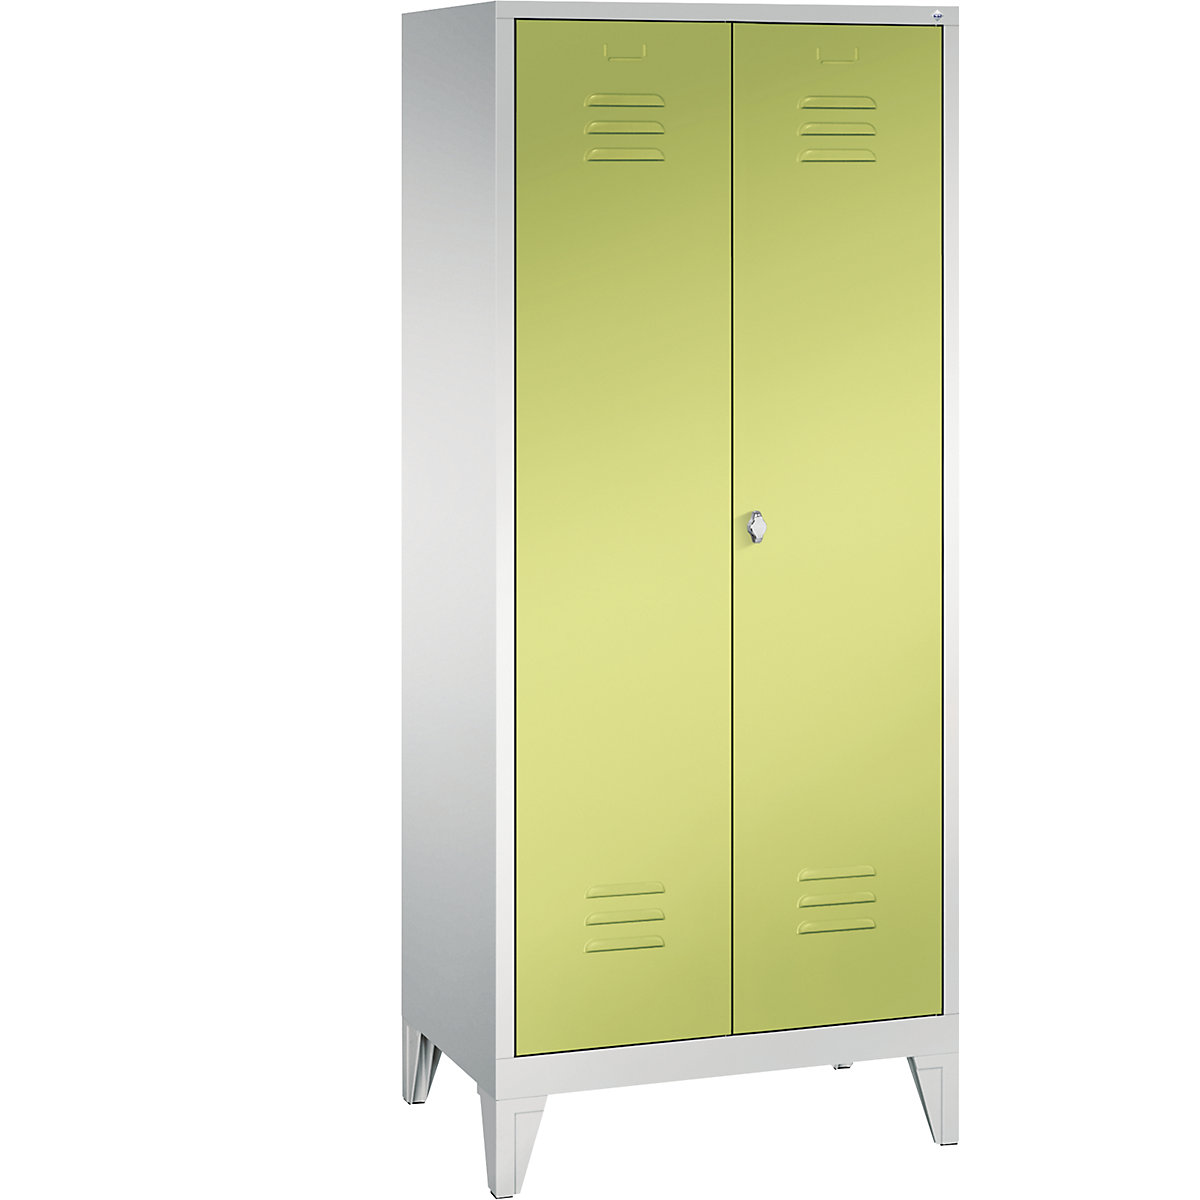 CLASSIC storage cupboard with feet, doors close in the middle – C+P, 2 compartments, compartment width 400 mm, light grey / viridian green-6